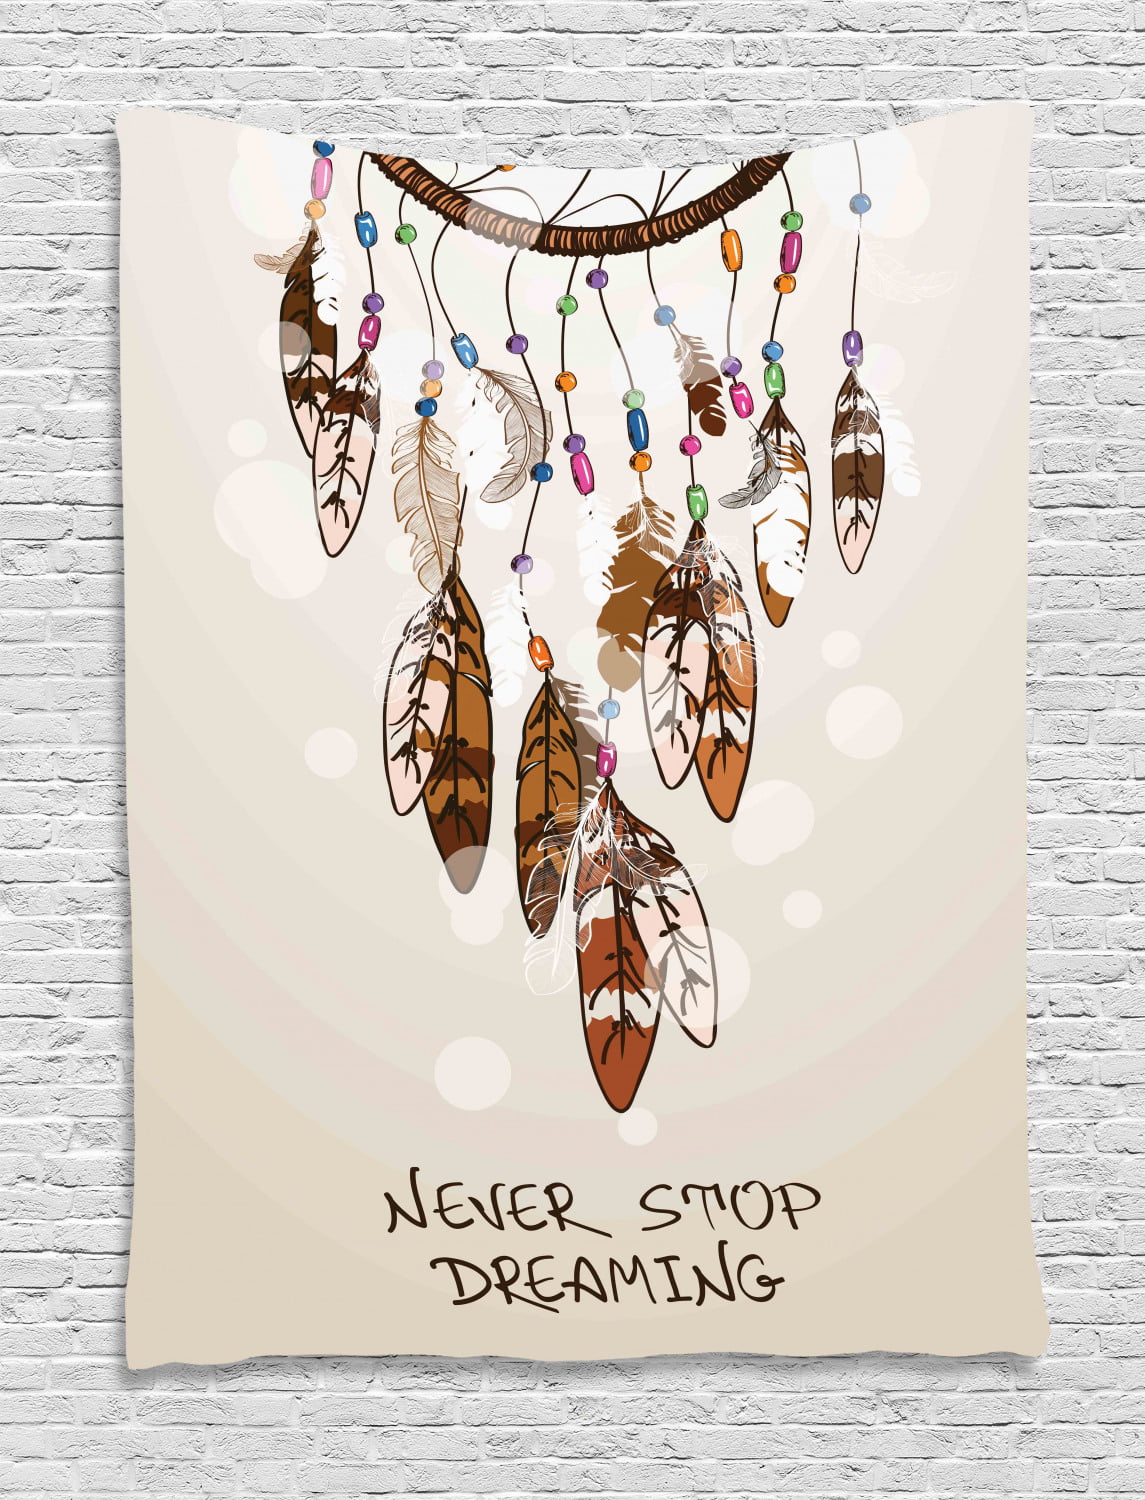 Dreamcatcher Feathers Tapestry Wall Hanging for Living Room Bedroom Dorm Decor 